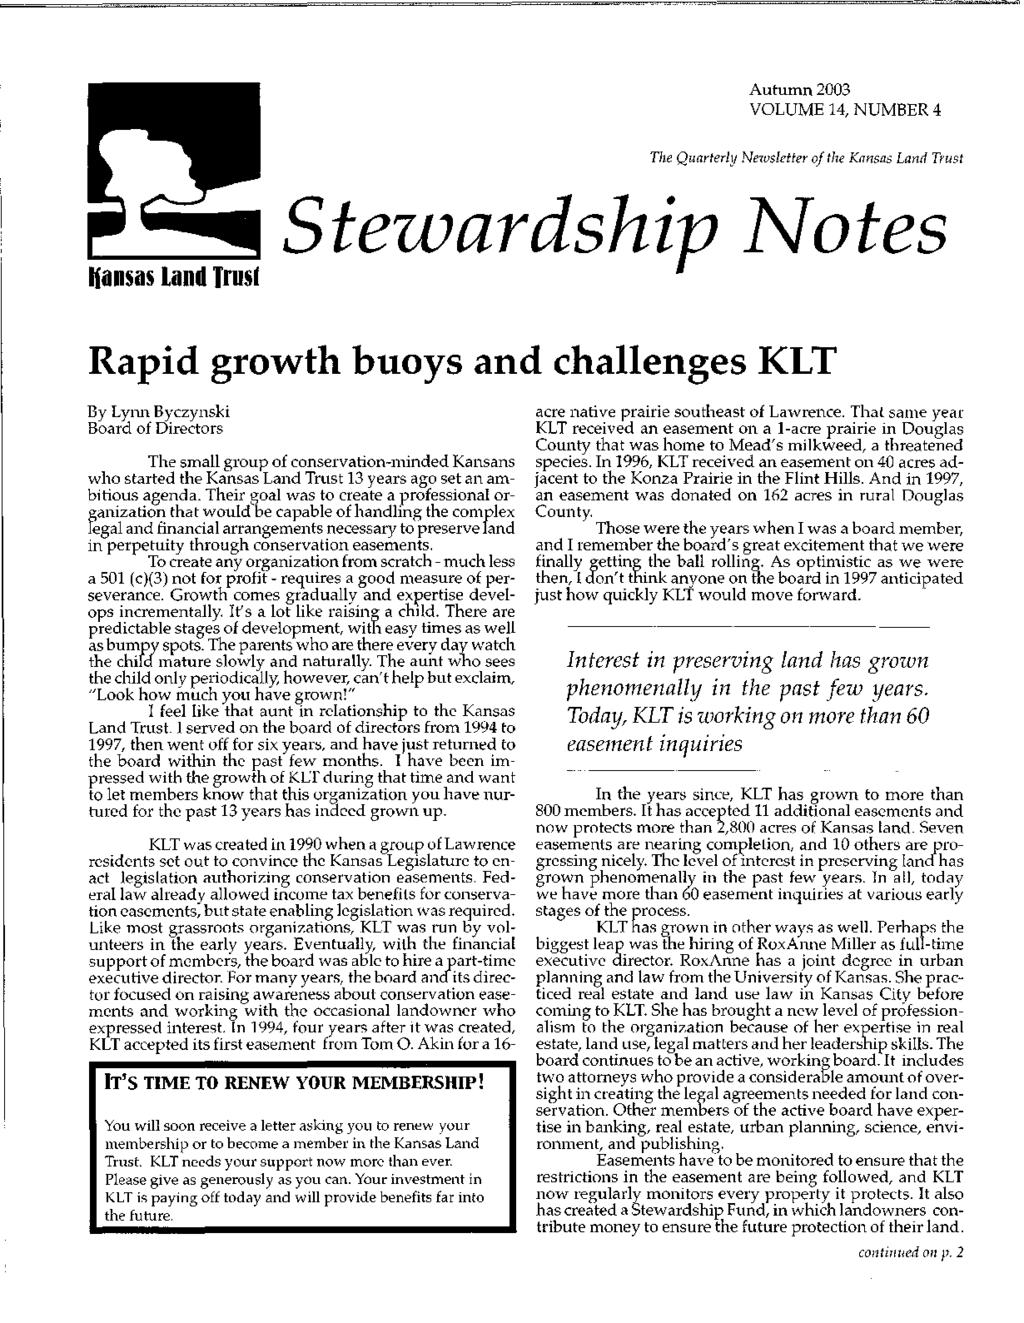 Autumn 2003 VOLUME 14, NUMBER 4 The Quarterly Newsletter of the Kansas Land Trust Hansas land Trust Stezvardship}Votes Rapid growth buoys and challenges KLT By Lynn Byczynski Board of Directors The